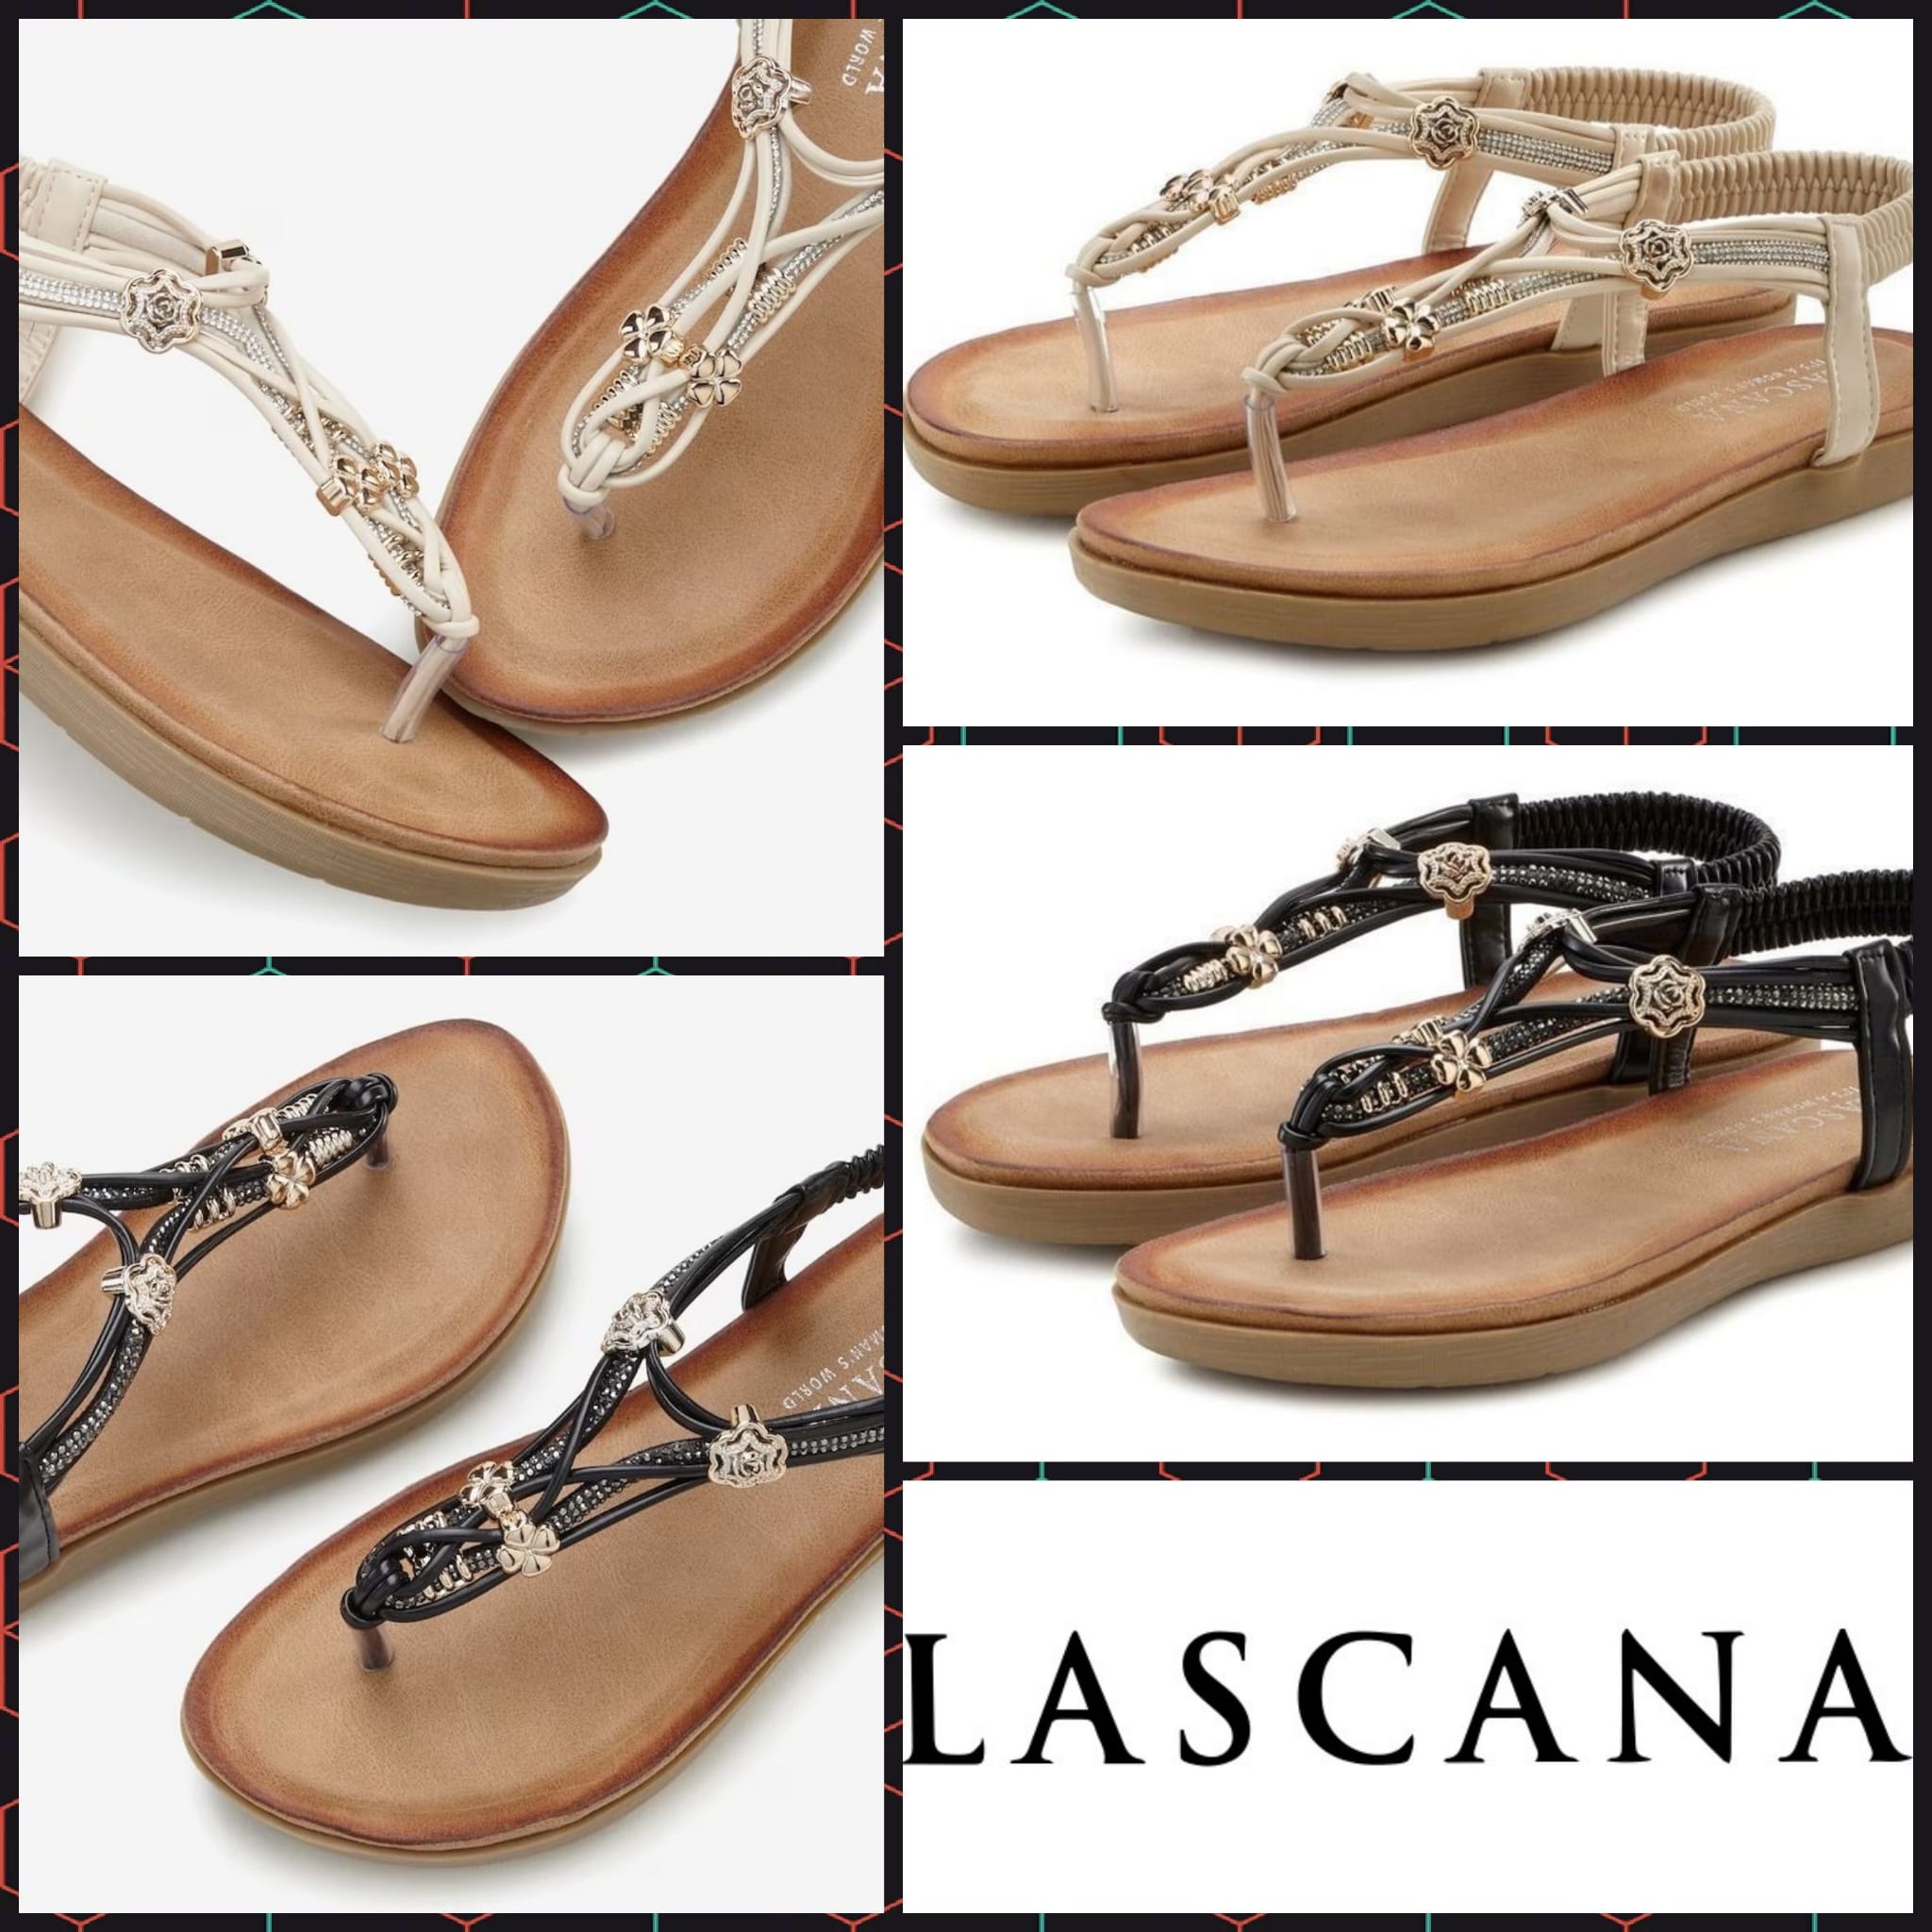 Women's sandals from Lascana